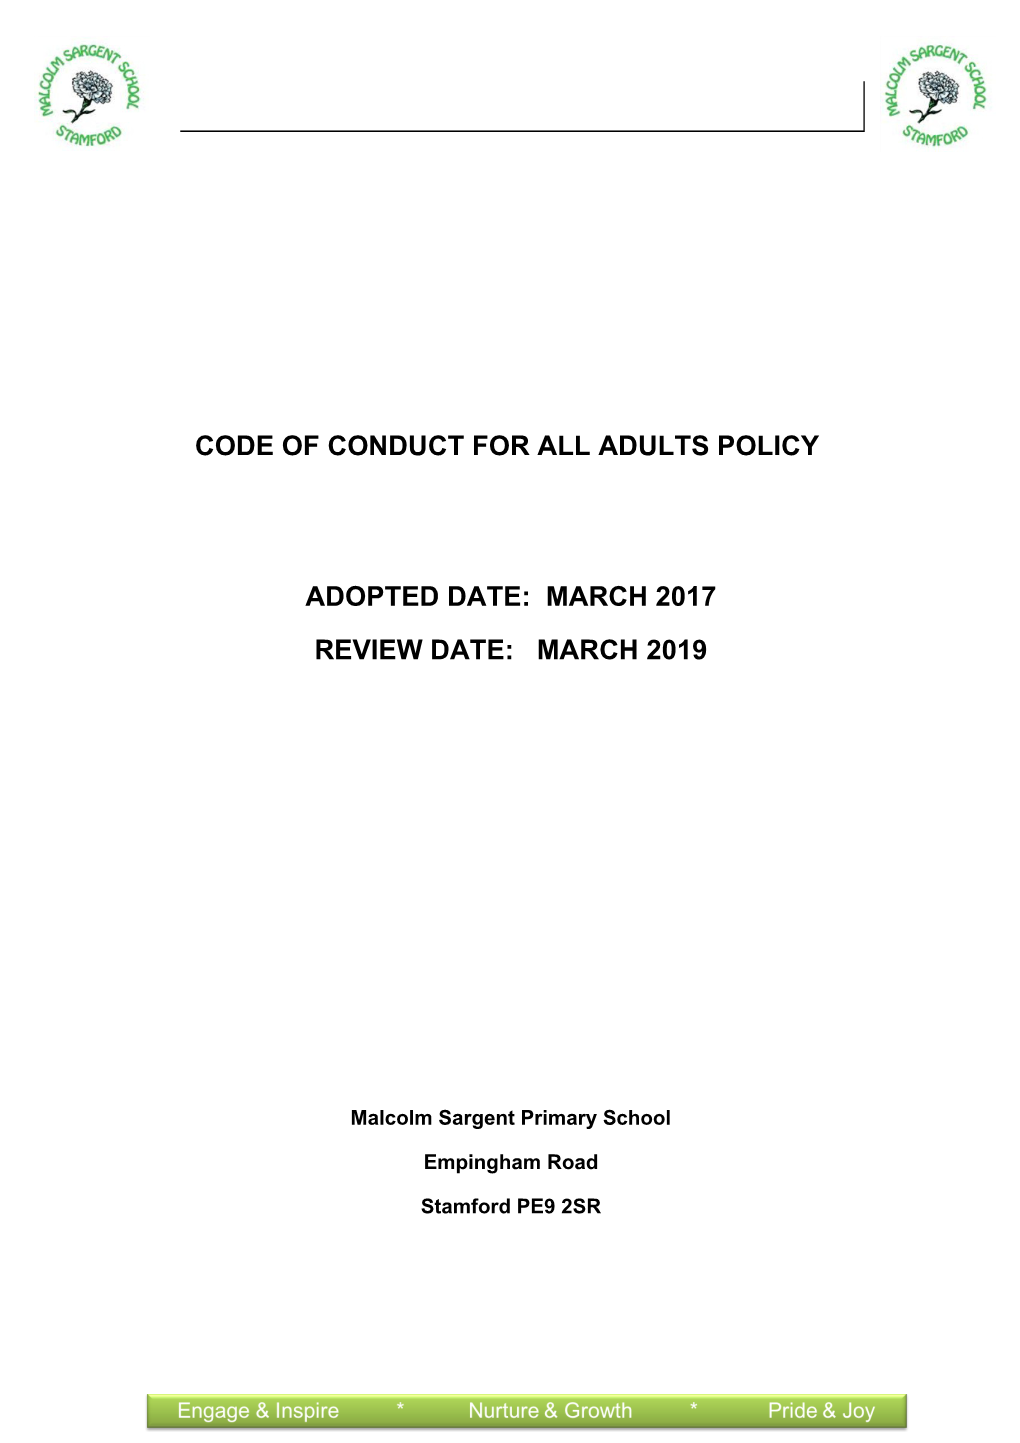 Code of Conduct for All Adults Policy